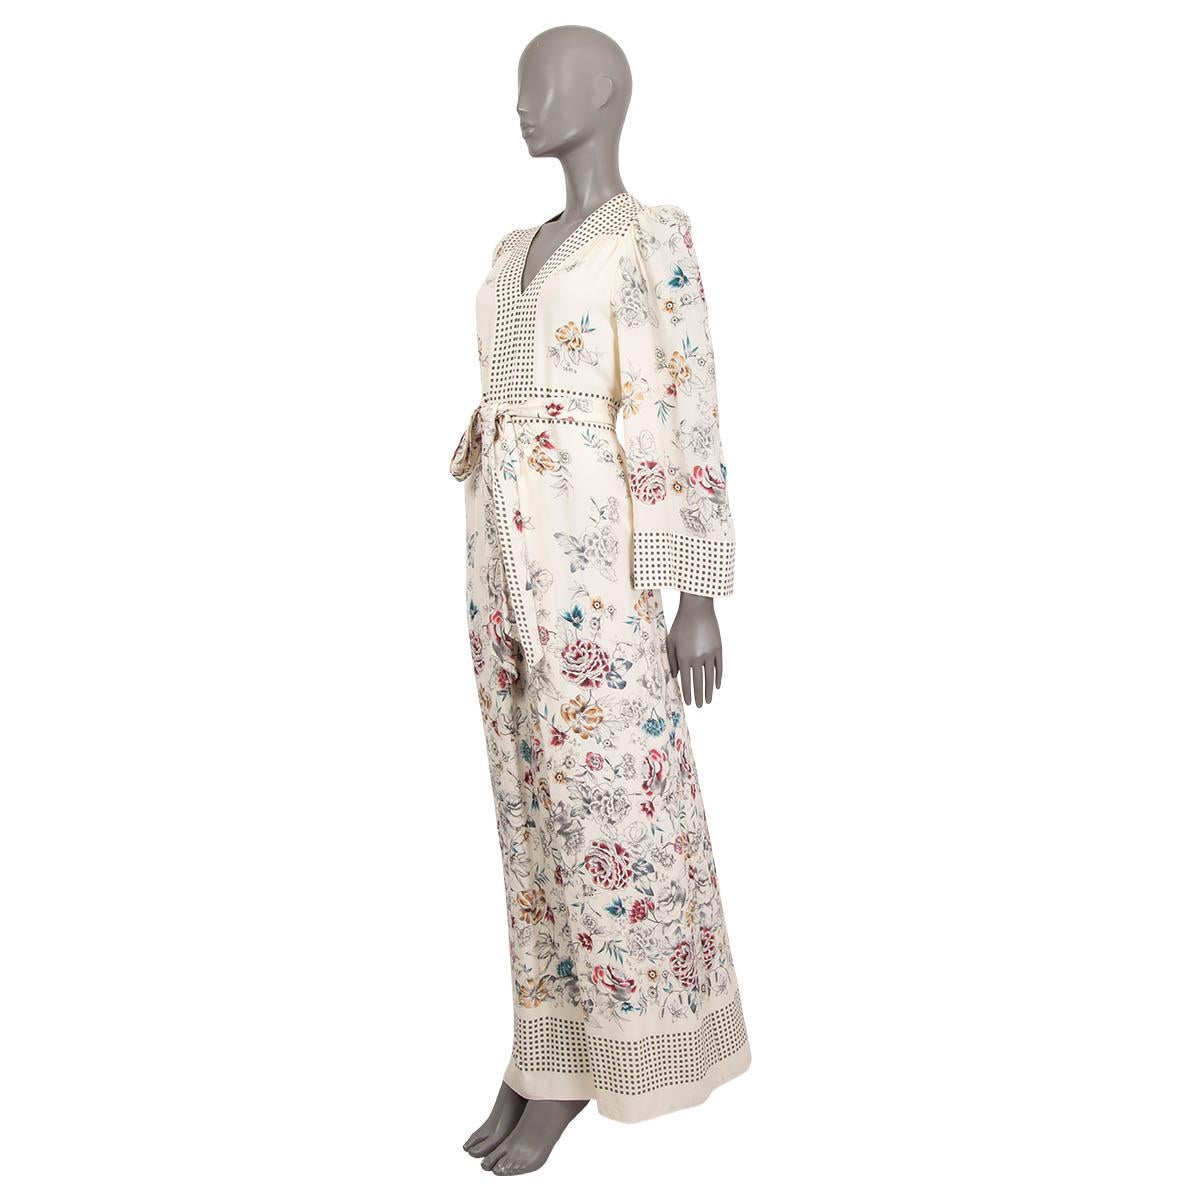 100% authentic Vilshenko Resort 2017 belted maxi dress in ivory, gray, pink, mustard and turqouise silk (100%). Features a v-neck, a floral print and long flared sleeves. Lined in white silk (100%). Has been worn and is in excellent